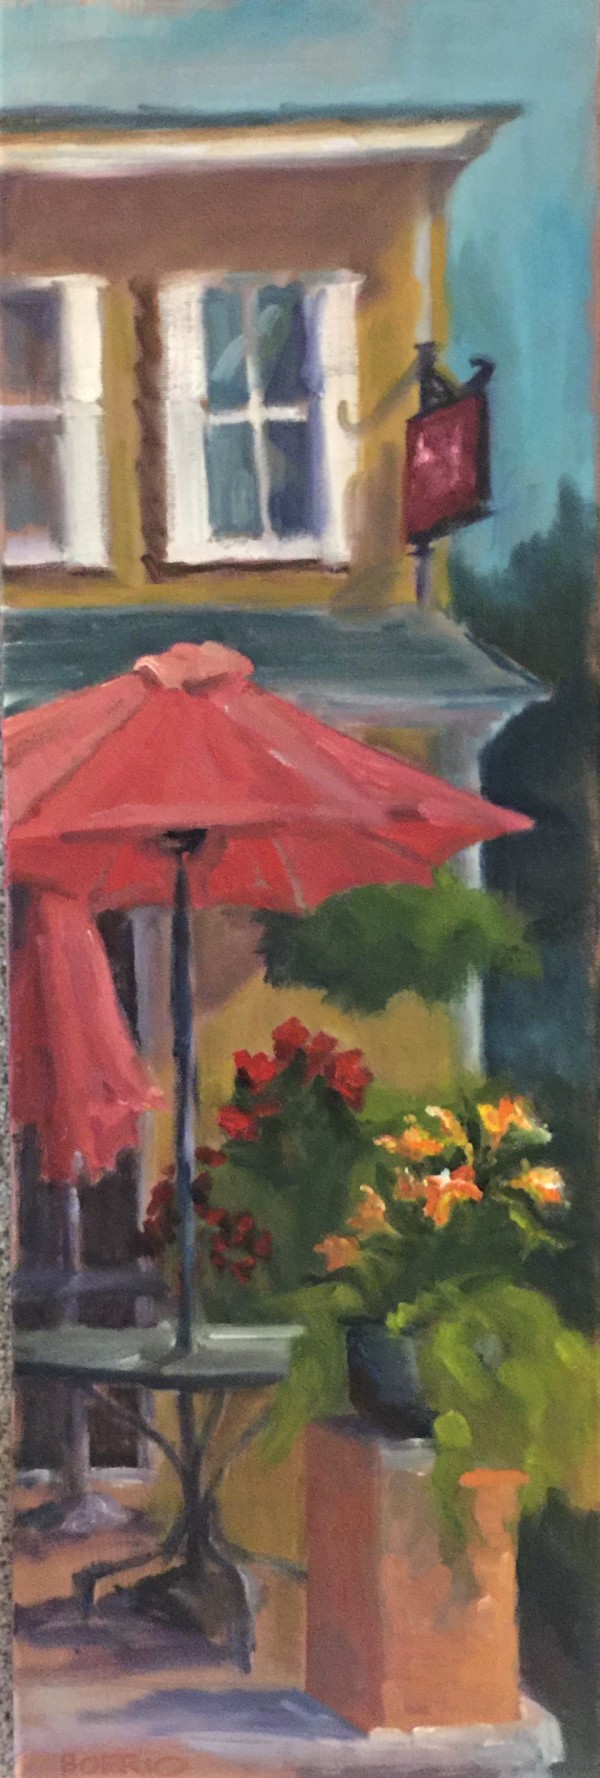 Sunlit patio on the square by Carrie Lacey Boerio